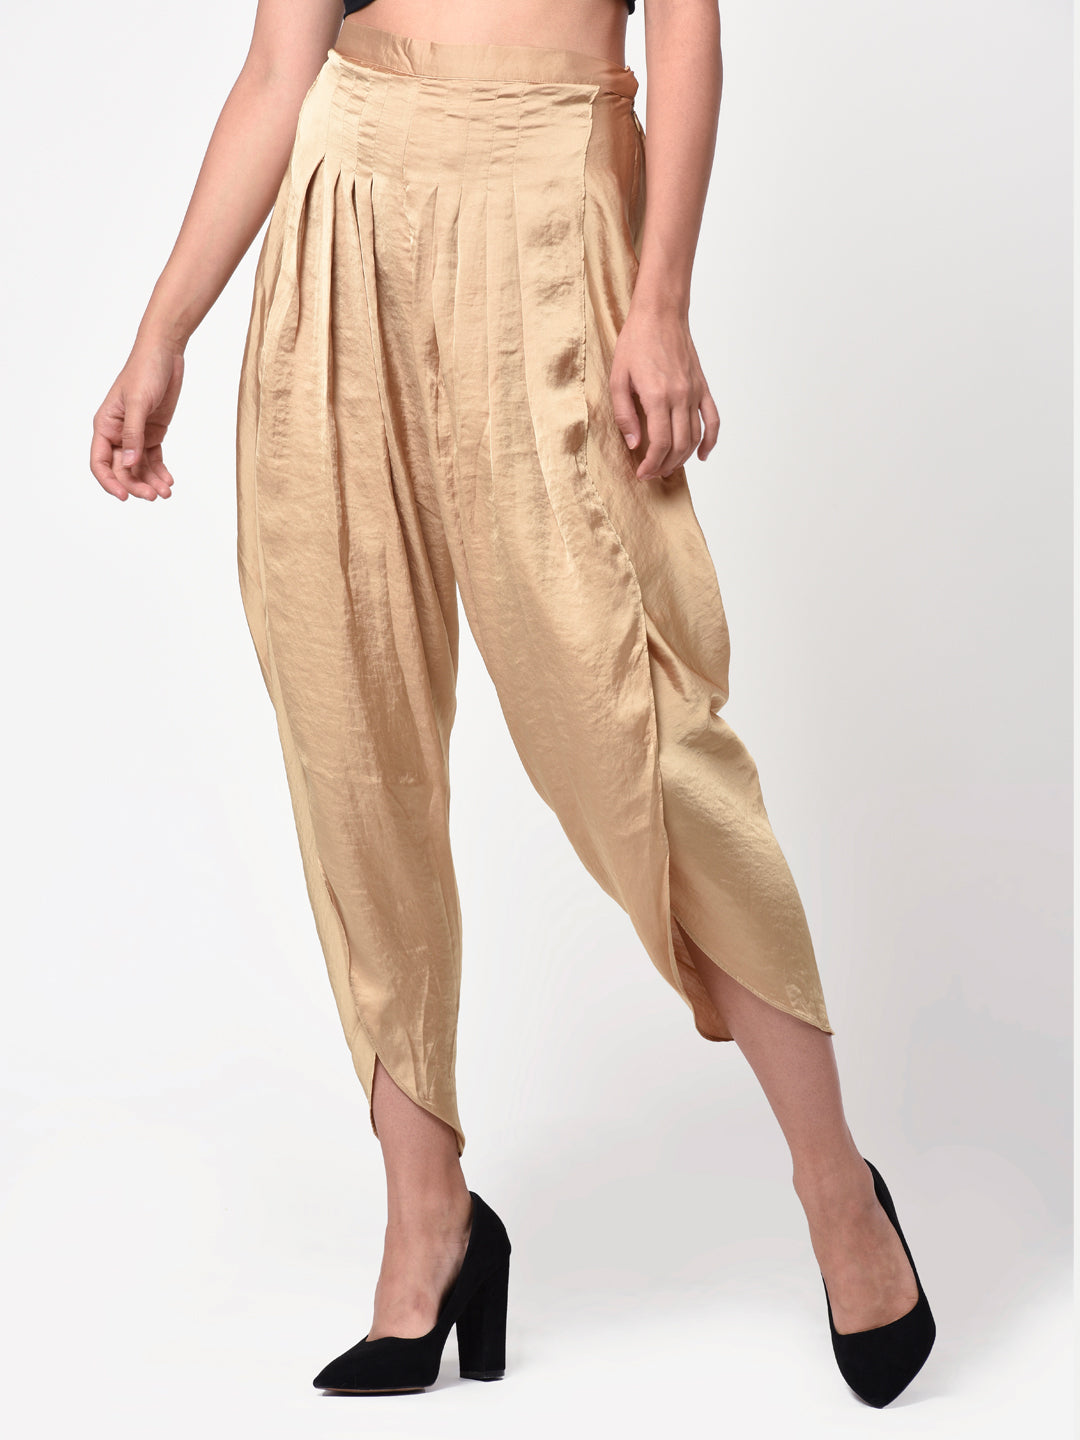 Juniper Indianwear  Buy Juniper Gold Cotton Solid Cigarette Pant Online   Nykaa Fashion